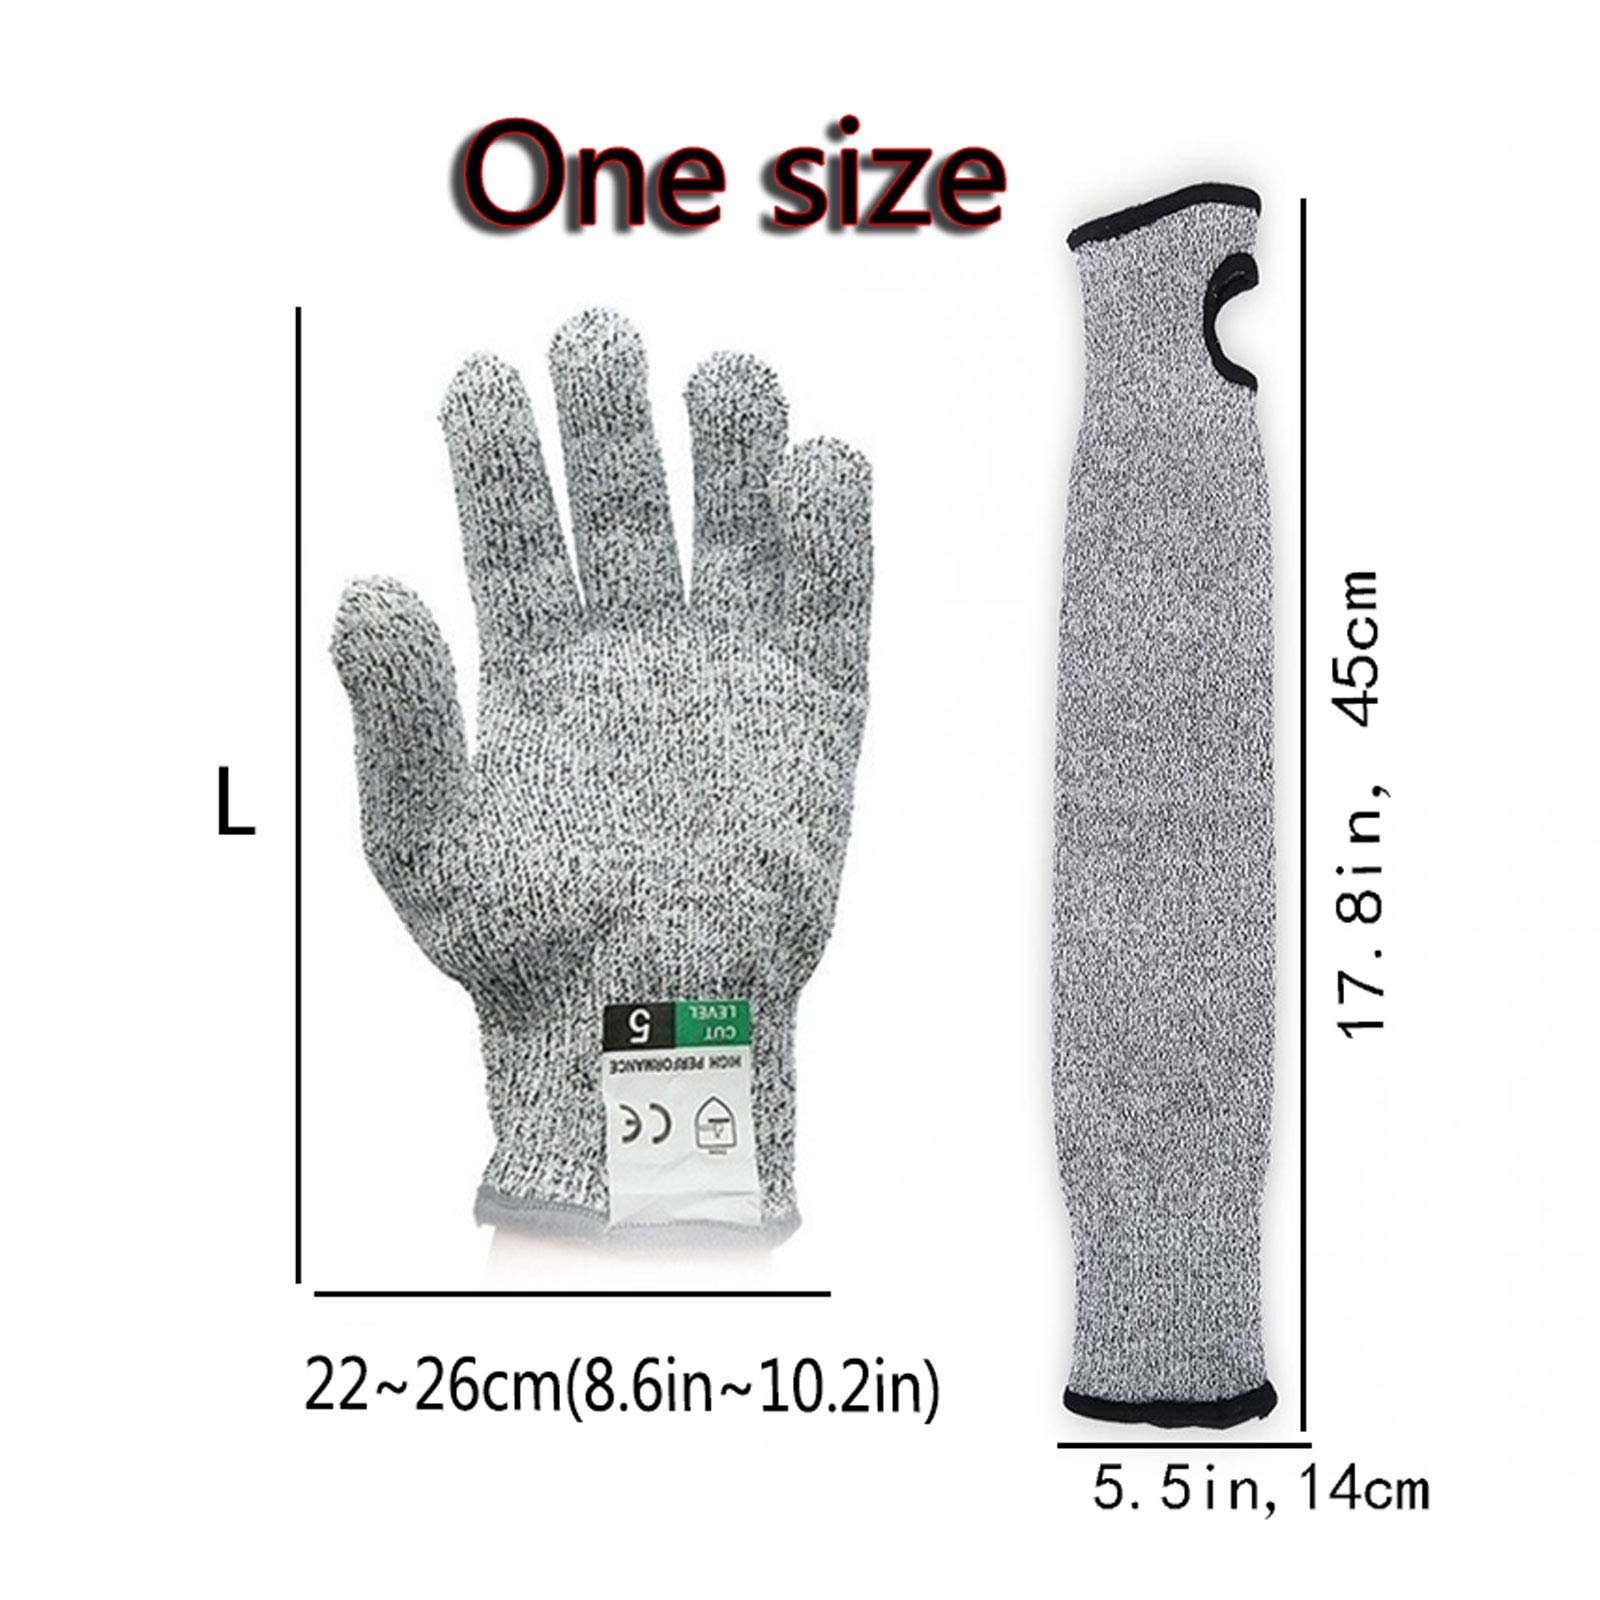 ANLONGLI Cut Resistant Sleeves Proof Gloves,18-Inch Cut Resistant Knit Sleeves grade 5 anti-cut Safety Glove,1 set Anti-cut arm cover for Kitchen Butcher Outdoor Work Protective Hands